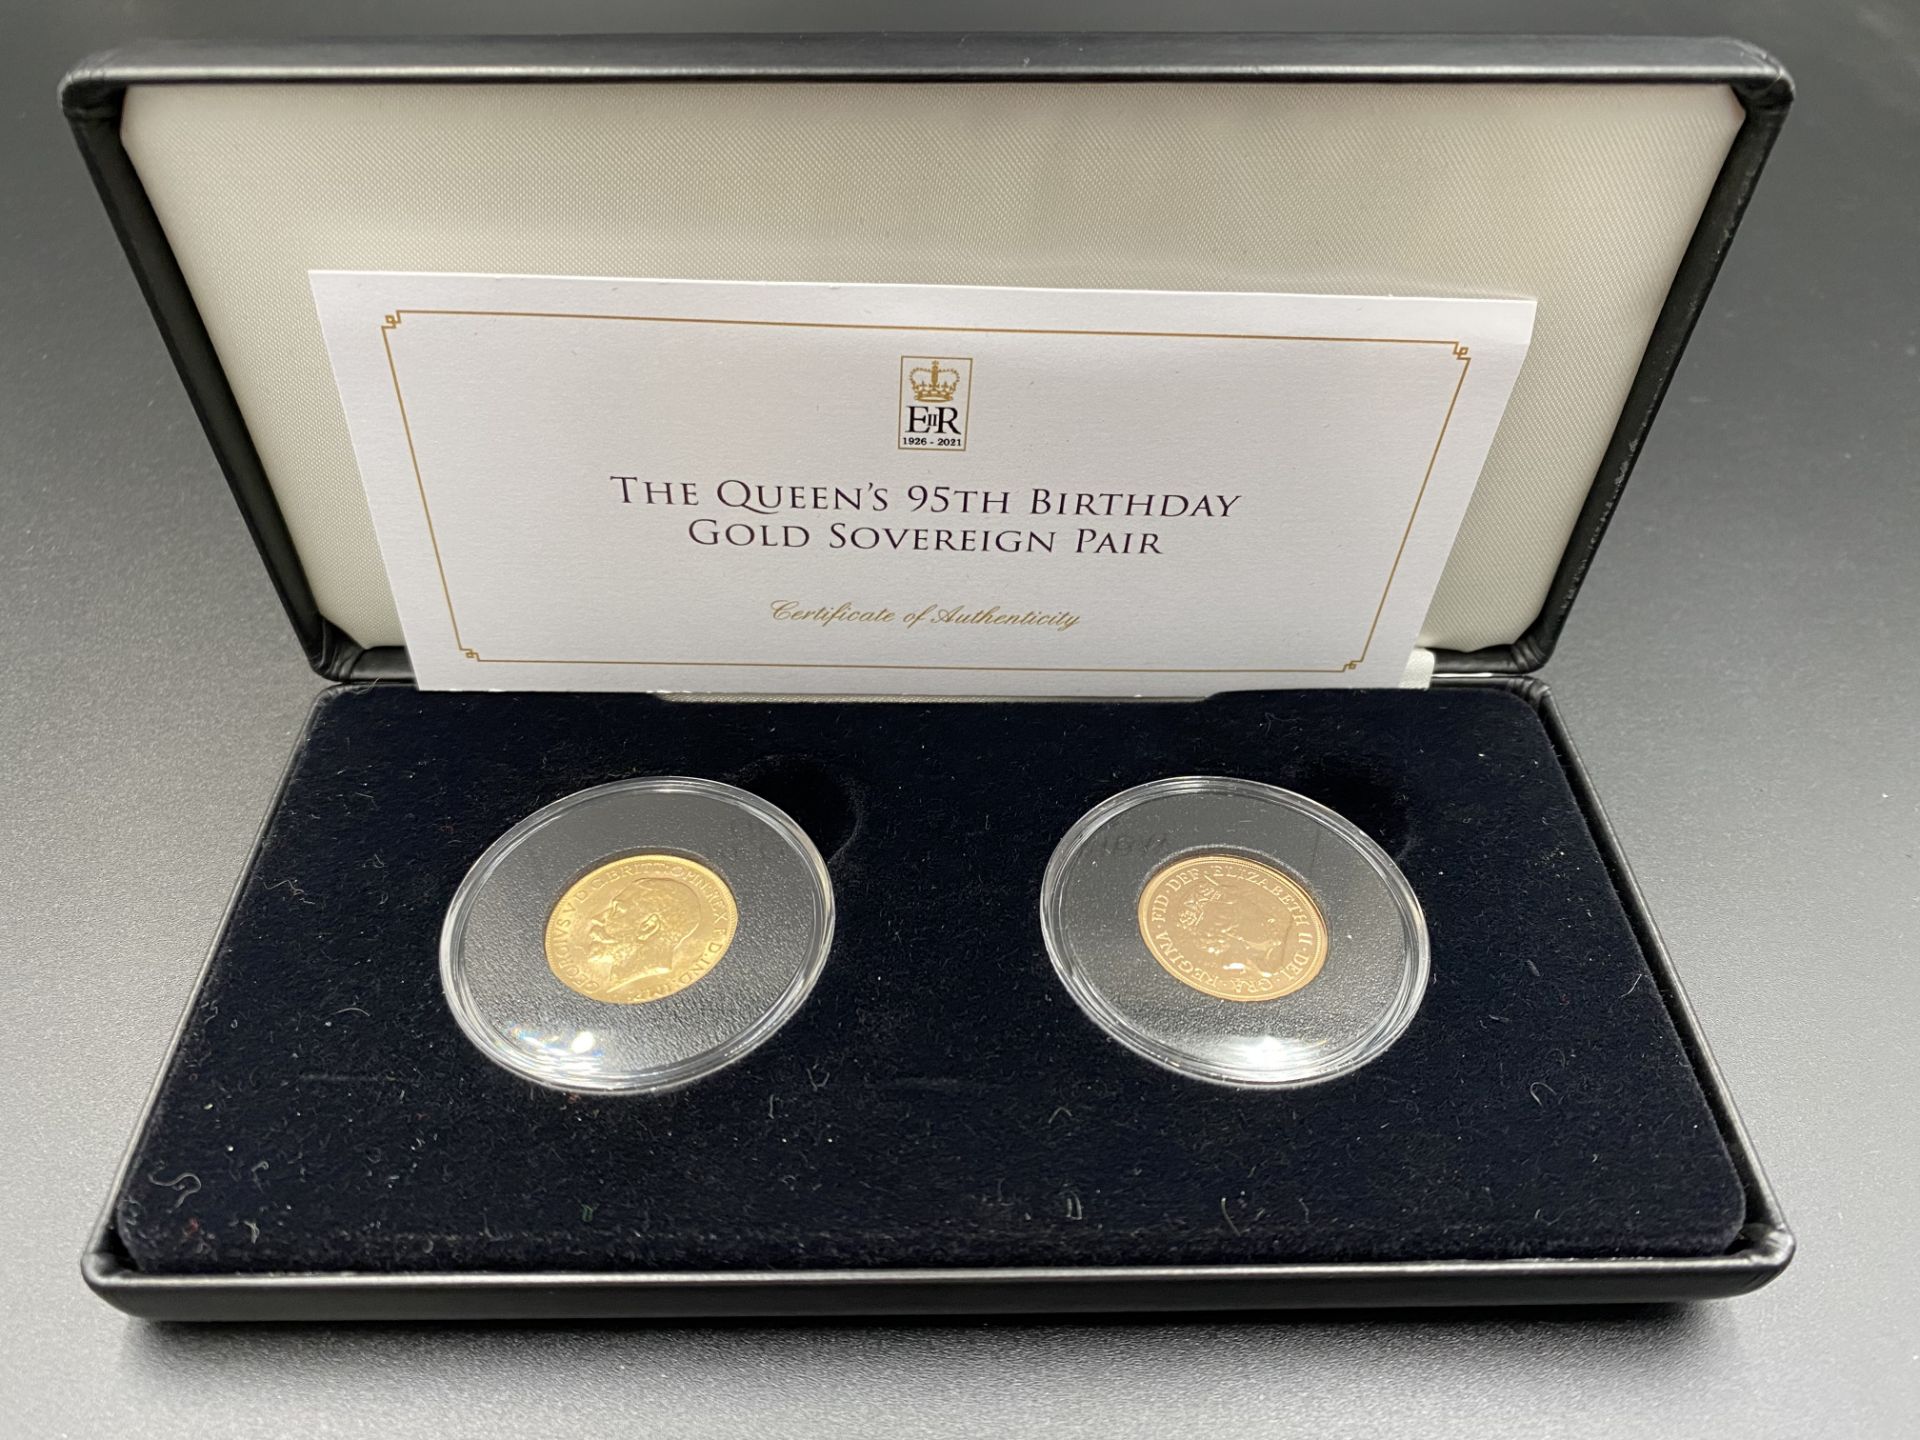 Jubilee Mint - Queen's 95th Birthday Gold Sovereign Pair